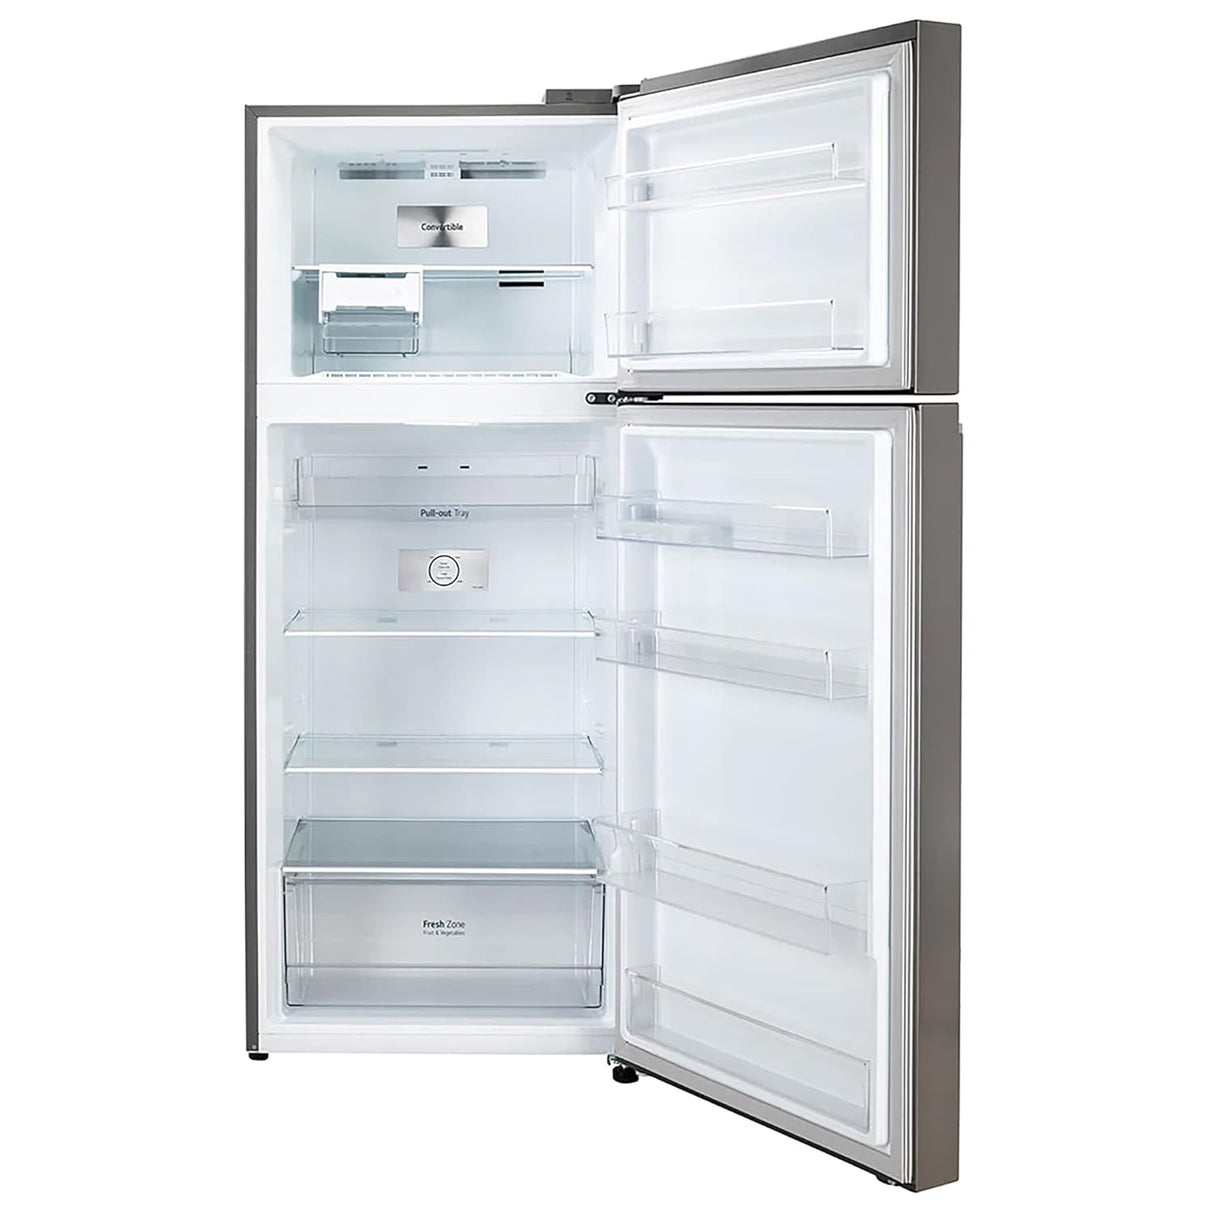 LG 380 Litres 2 Star Frost Free Double Door Convertible Refrigerator (GL-S412SPZY, Shiny Steel)